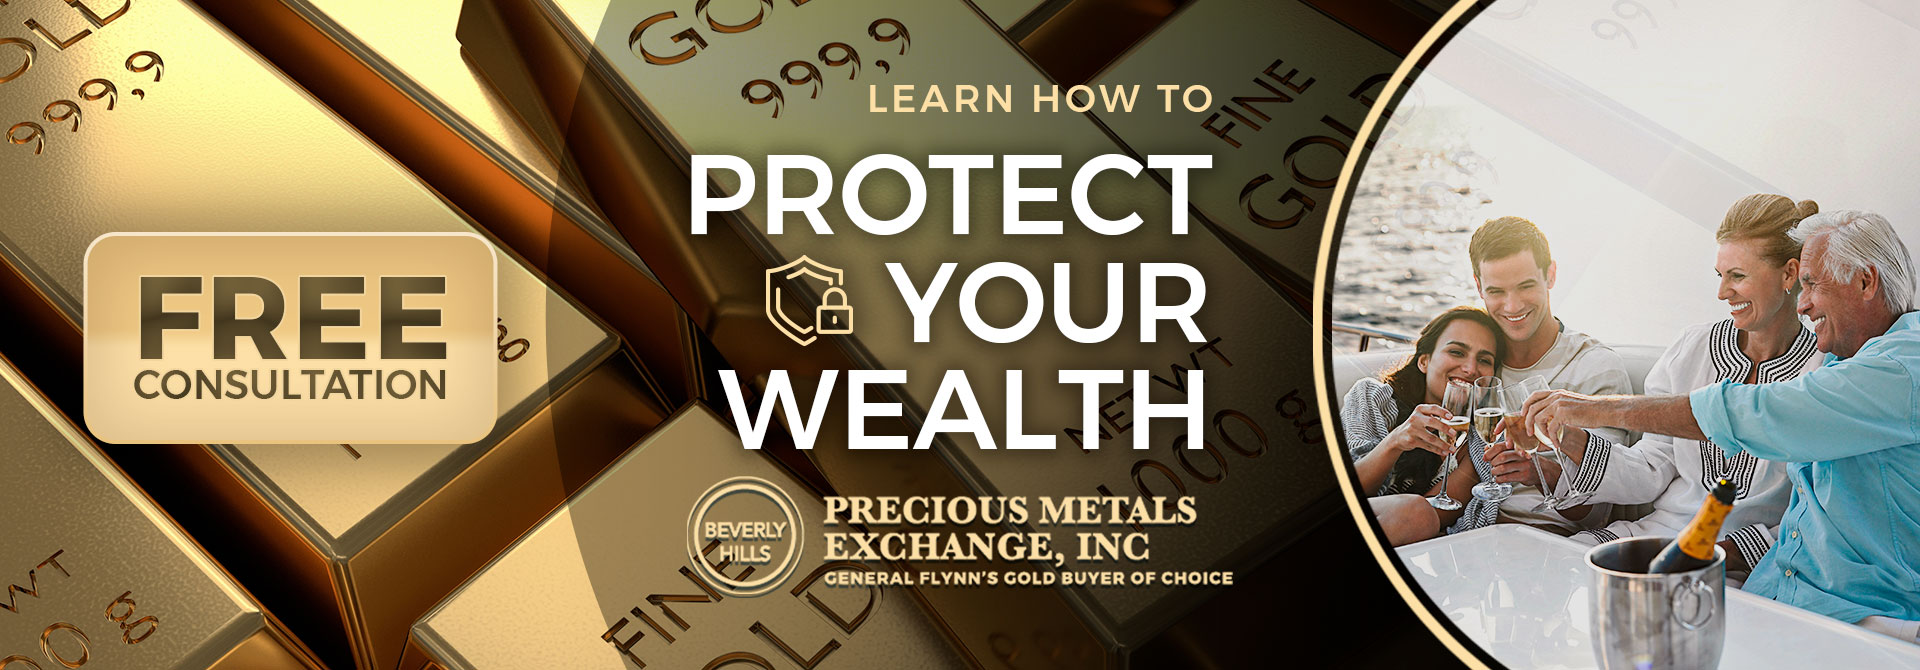 Learn How to Protect Your Wealth Against Inflation Today At: www.BH-PM.com